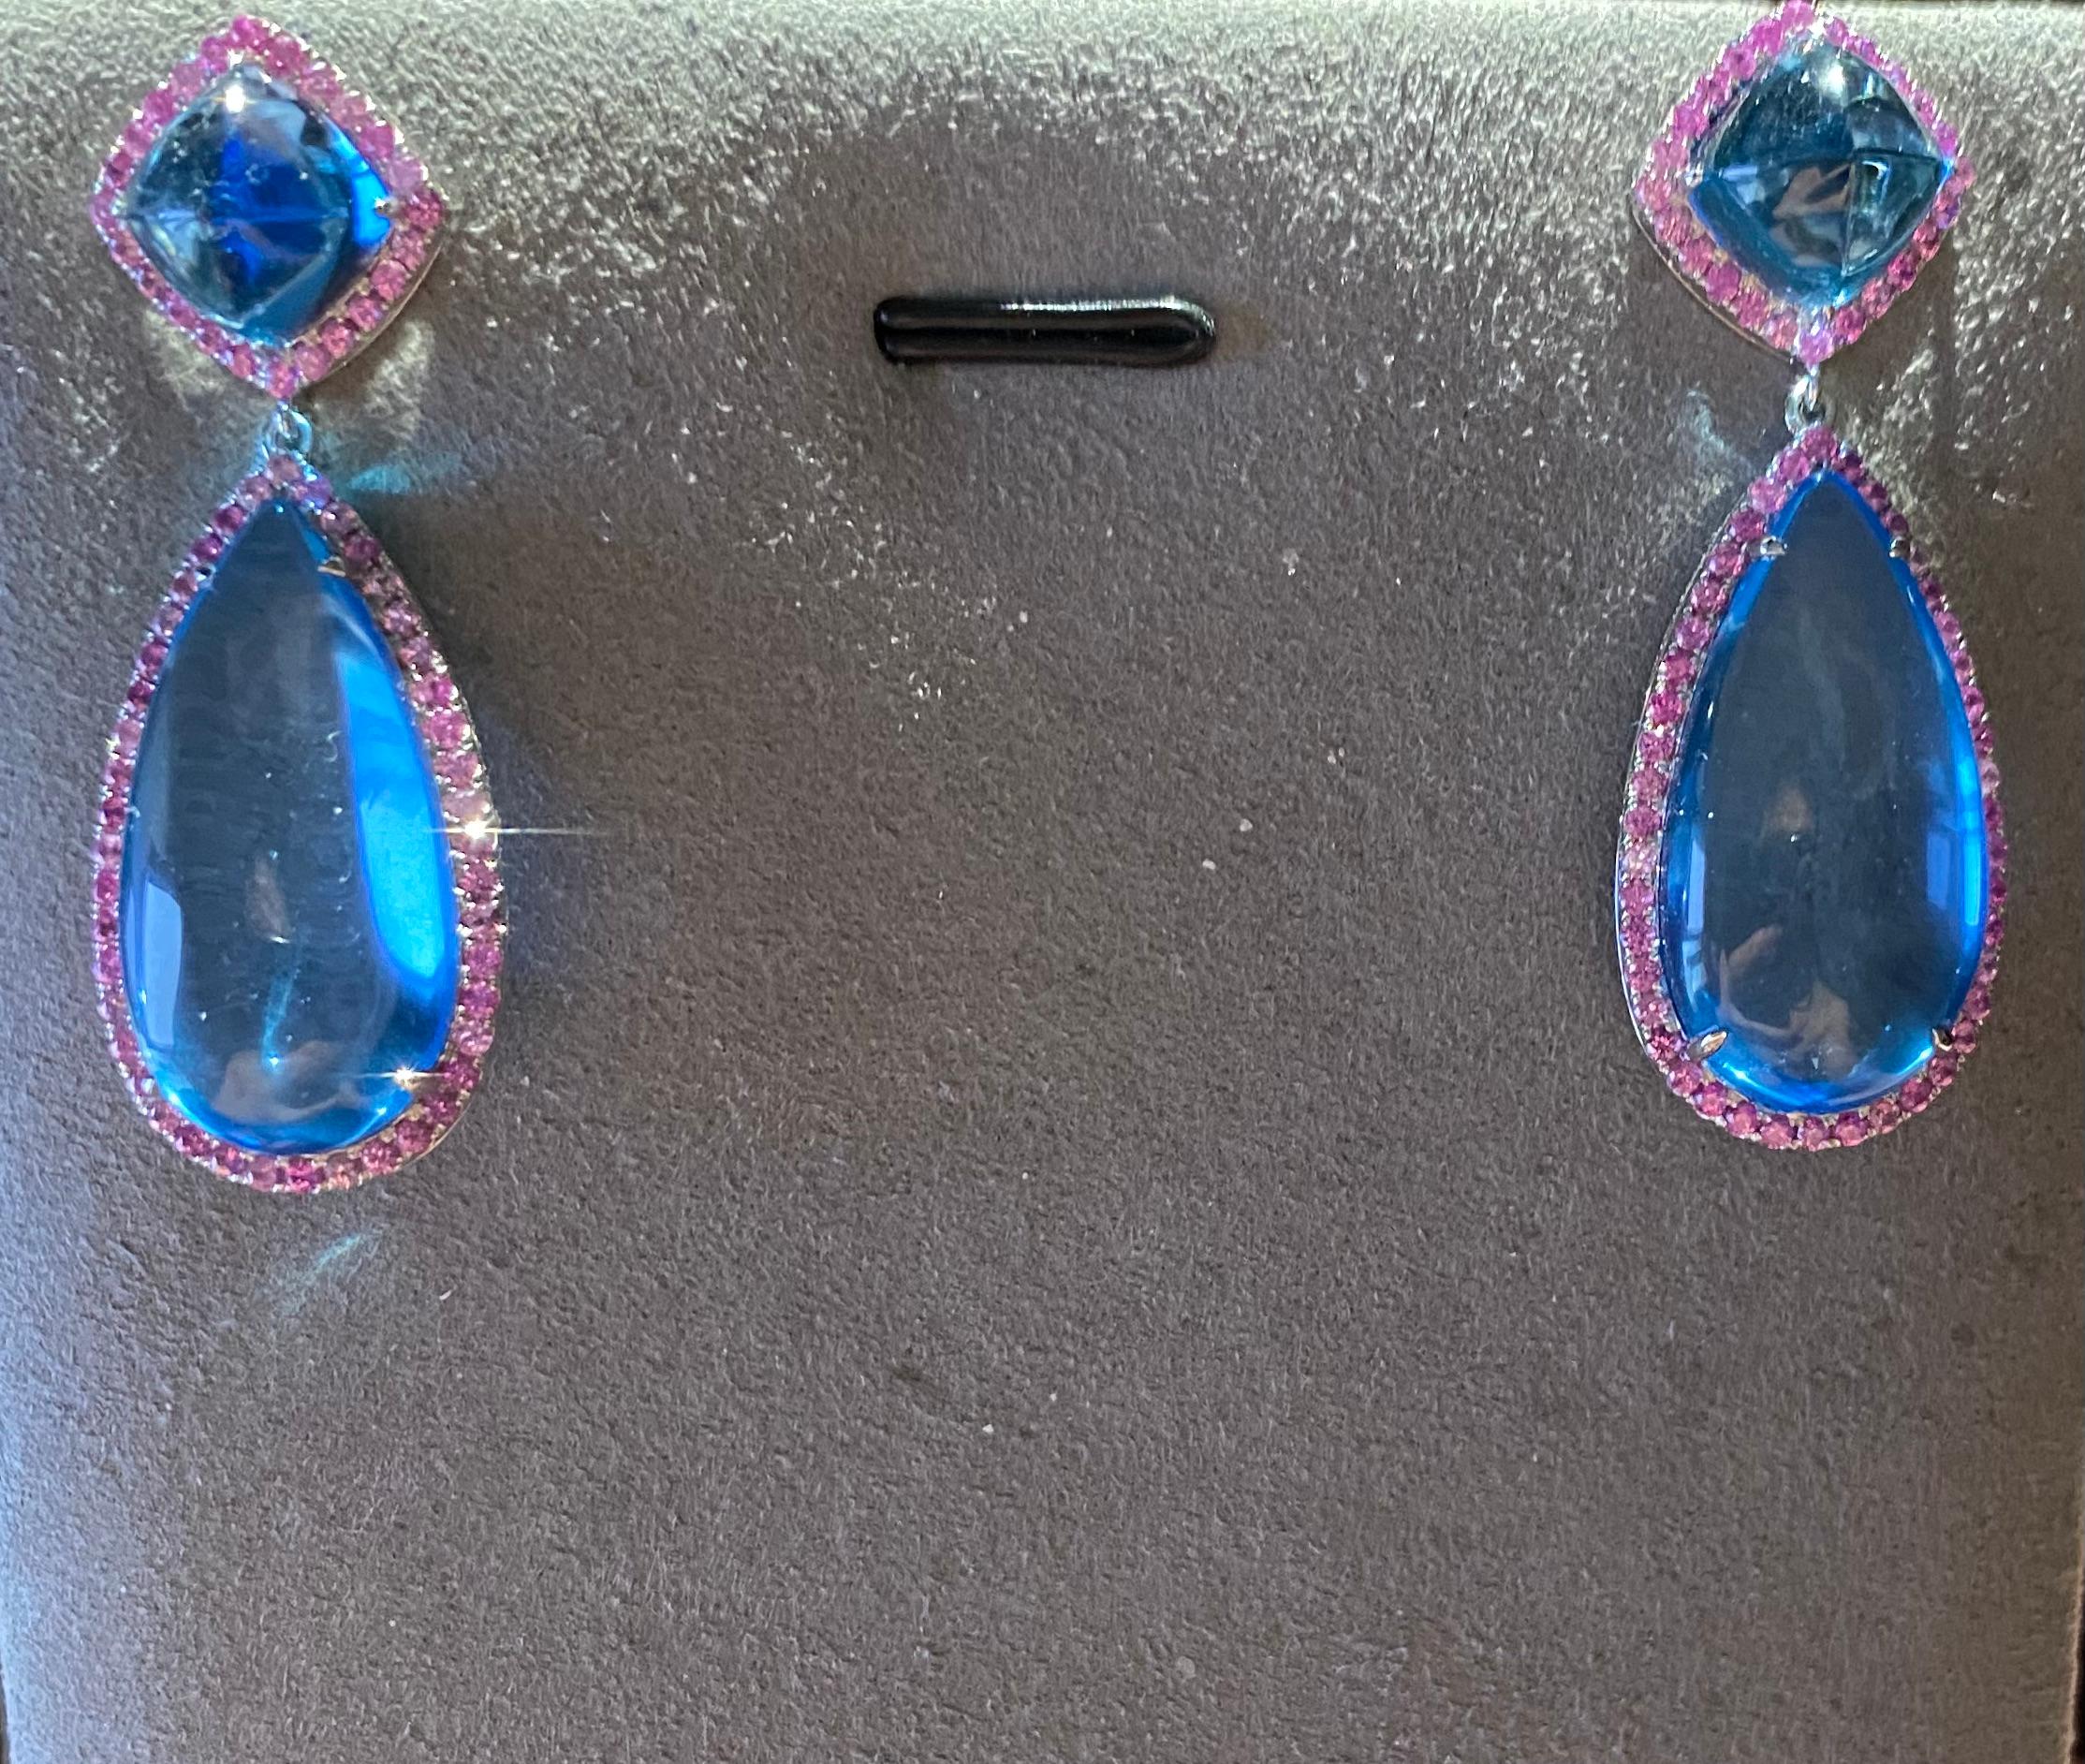 This is a Pair of Dangle Earring consists of 35ct of Blue Topaz. On top end, there are 2 sugarloaf Topaz surrounded by pink sapphire. They were followed by 2 massive raindrop Topaz Cabochon. The Topaz cabochon is also surrounded by pink sapphire